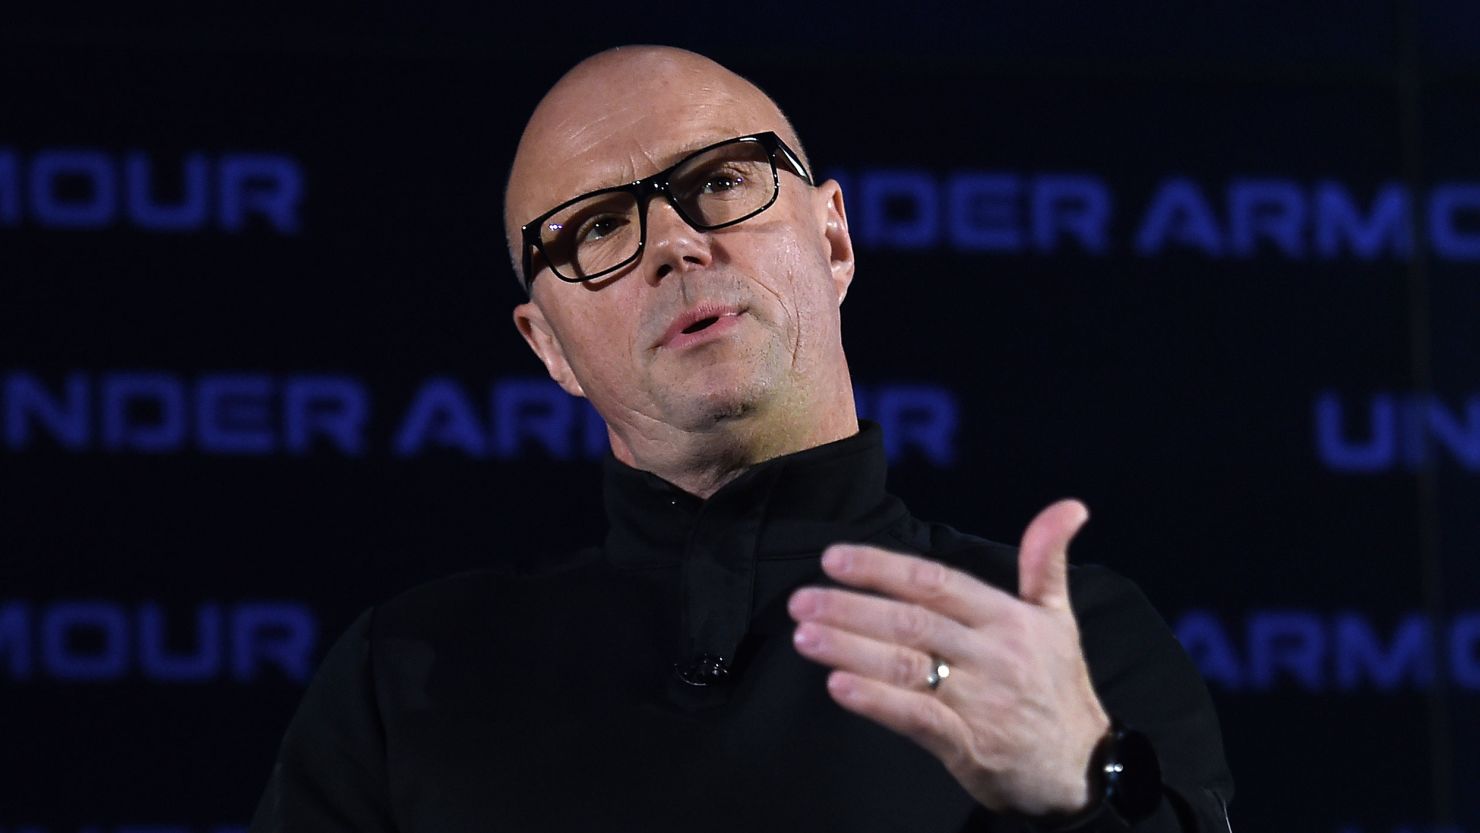 Patrik Frisk, Chief Executive Officer Of Under Armour, speaks at the 2020 Under Armour Human Performance Summit on January 14, 2020 in Baltimore, Maryland.